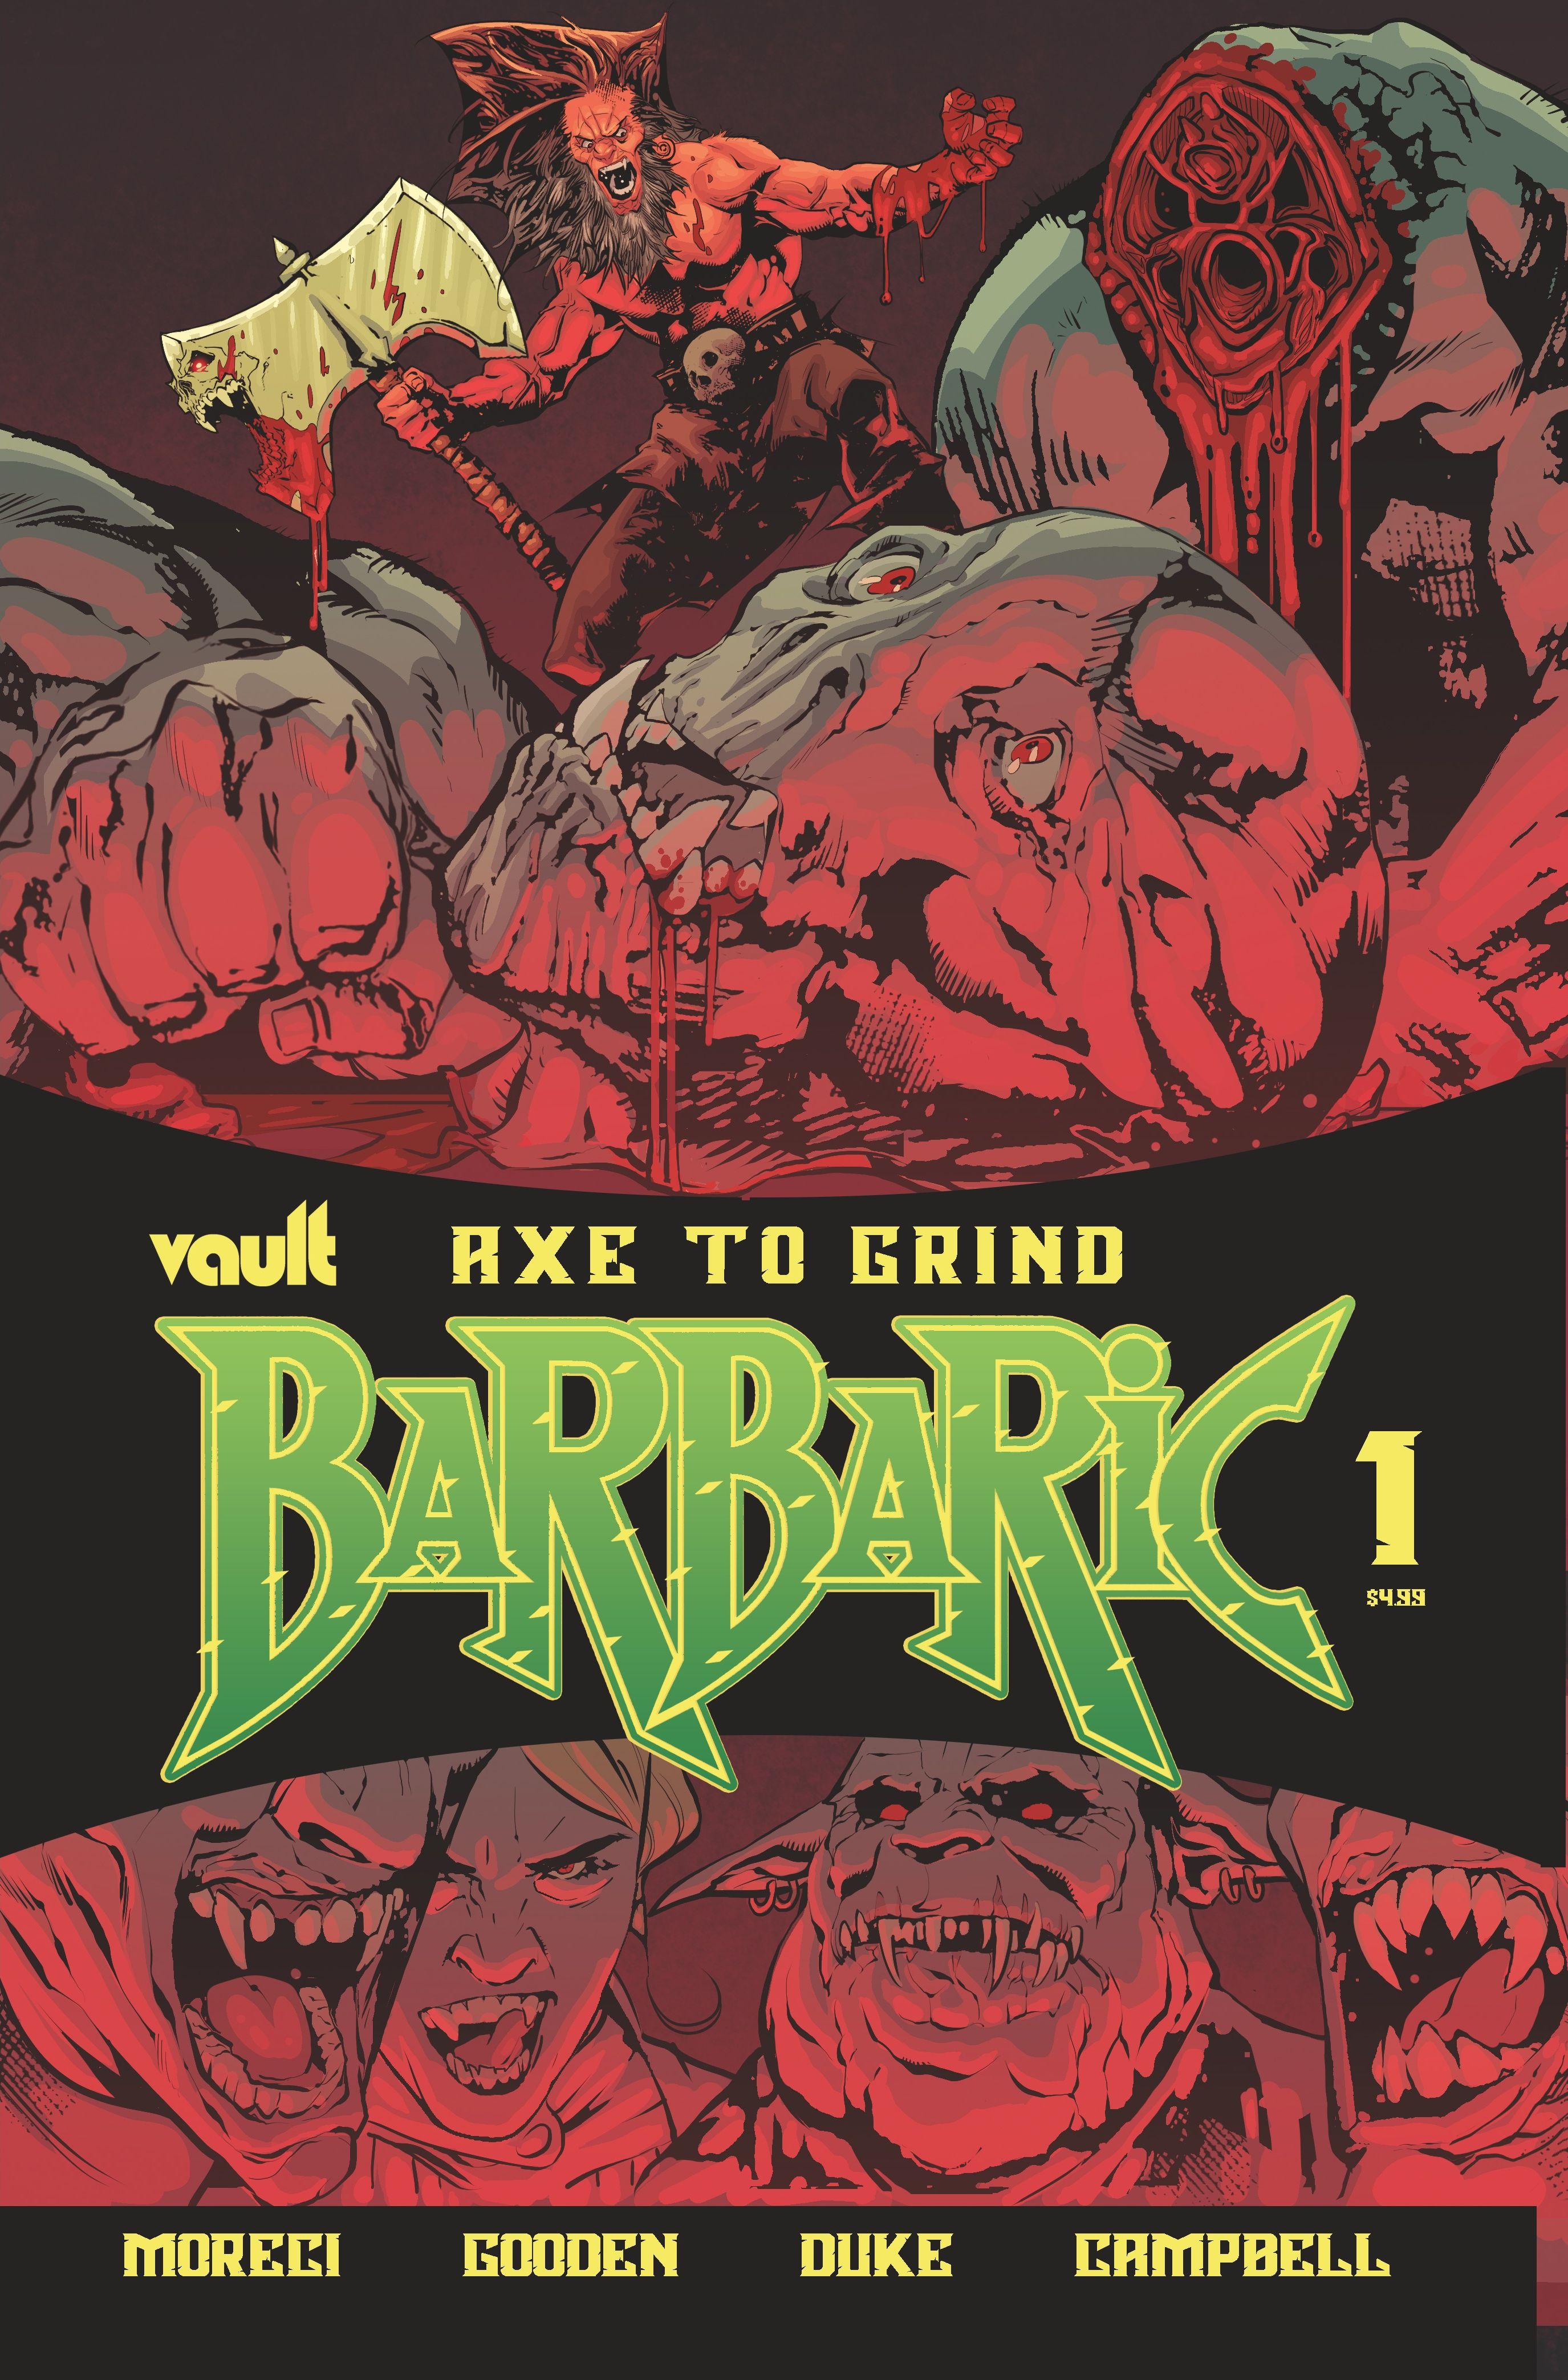 EXCLUSIVE: Michael Moreci’s Barbaric Returns for a New, Ultra-Bloody Series